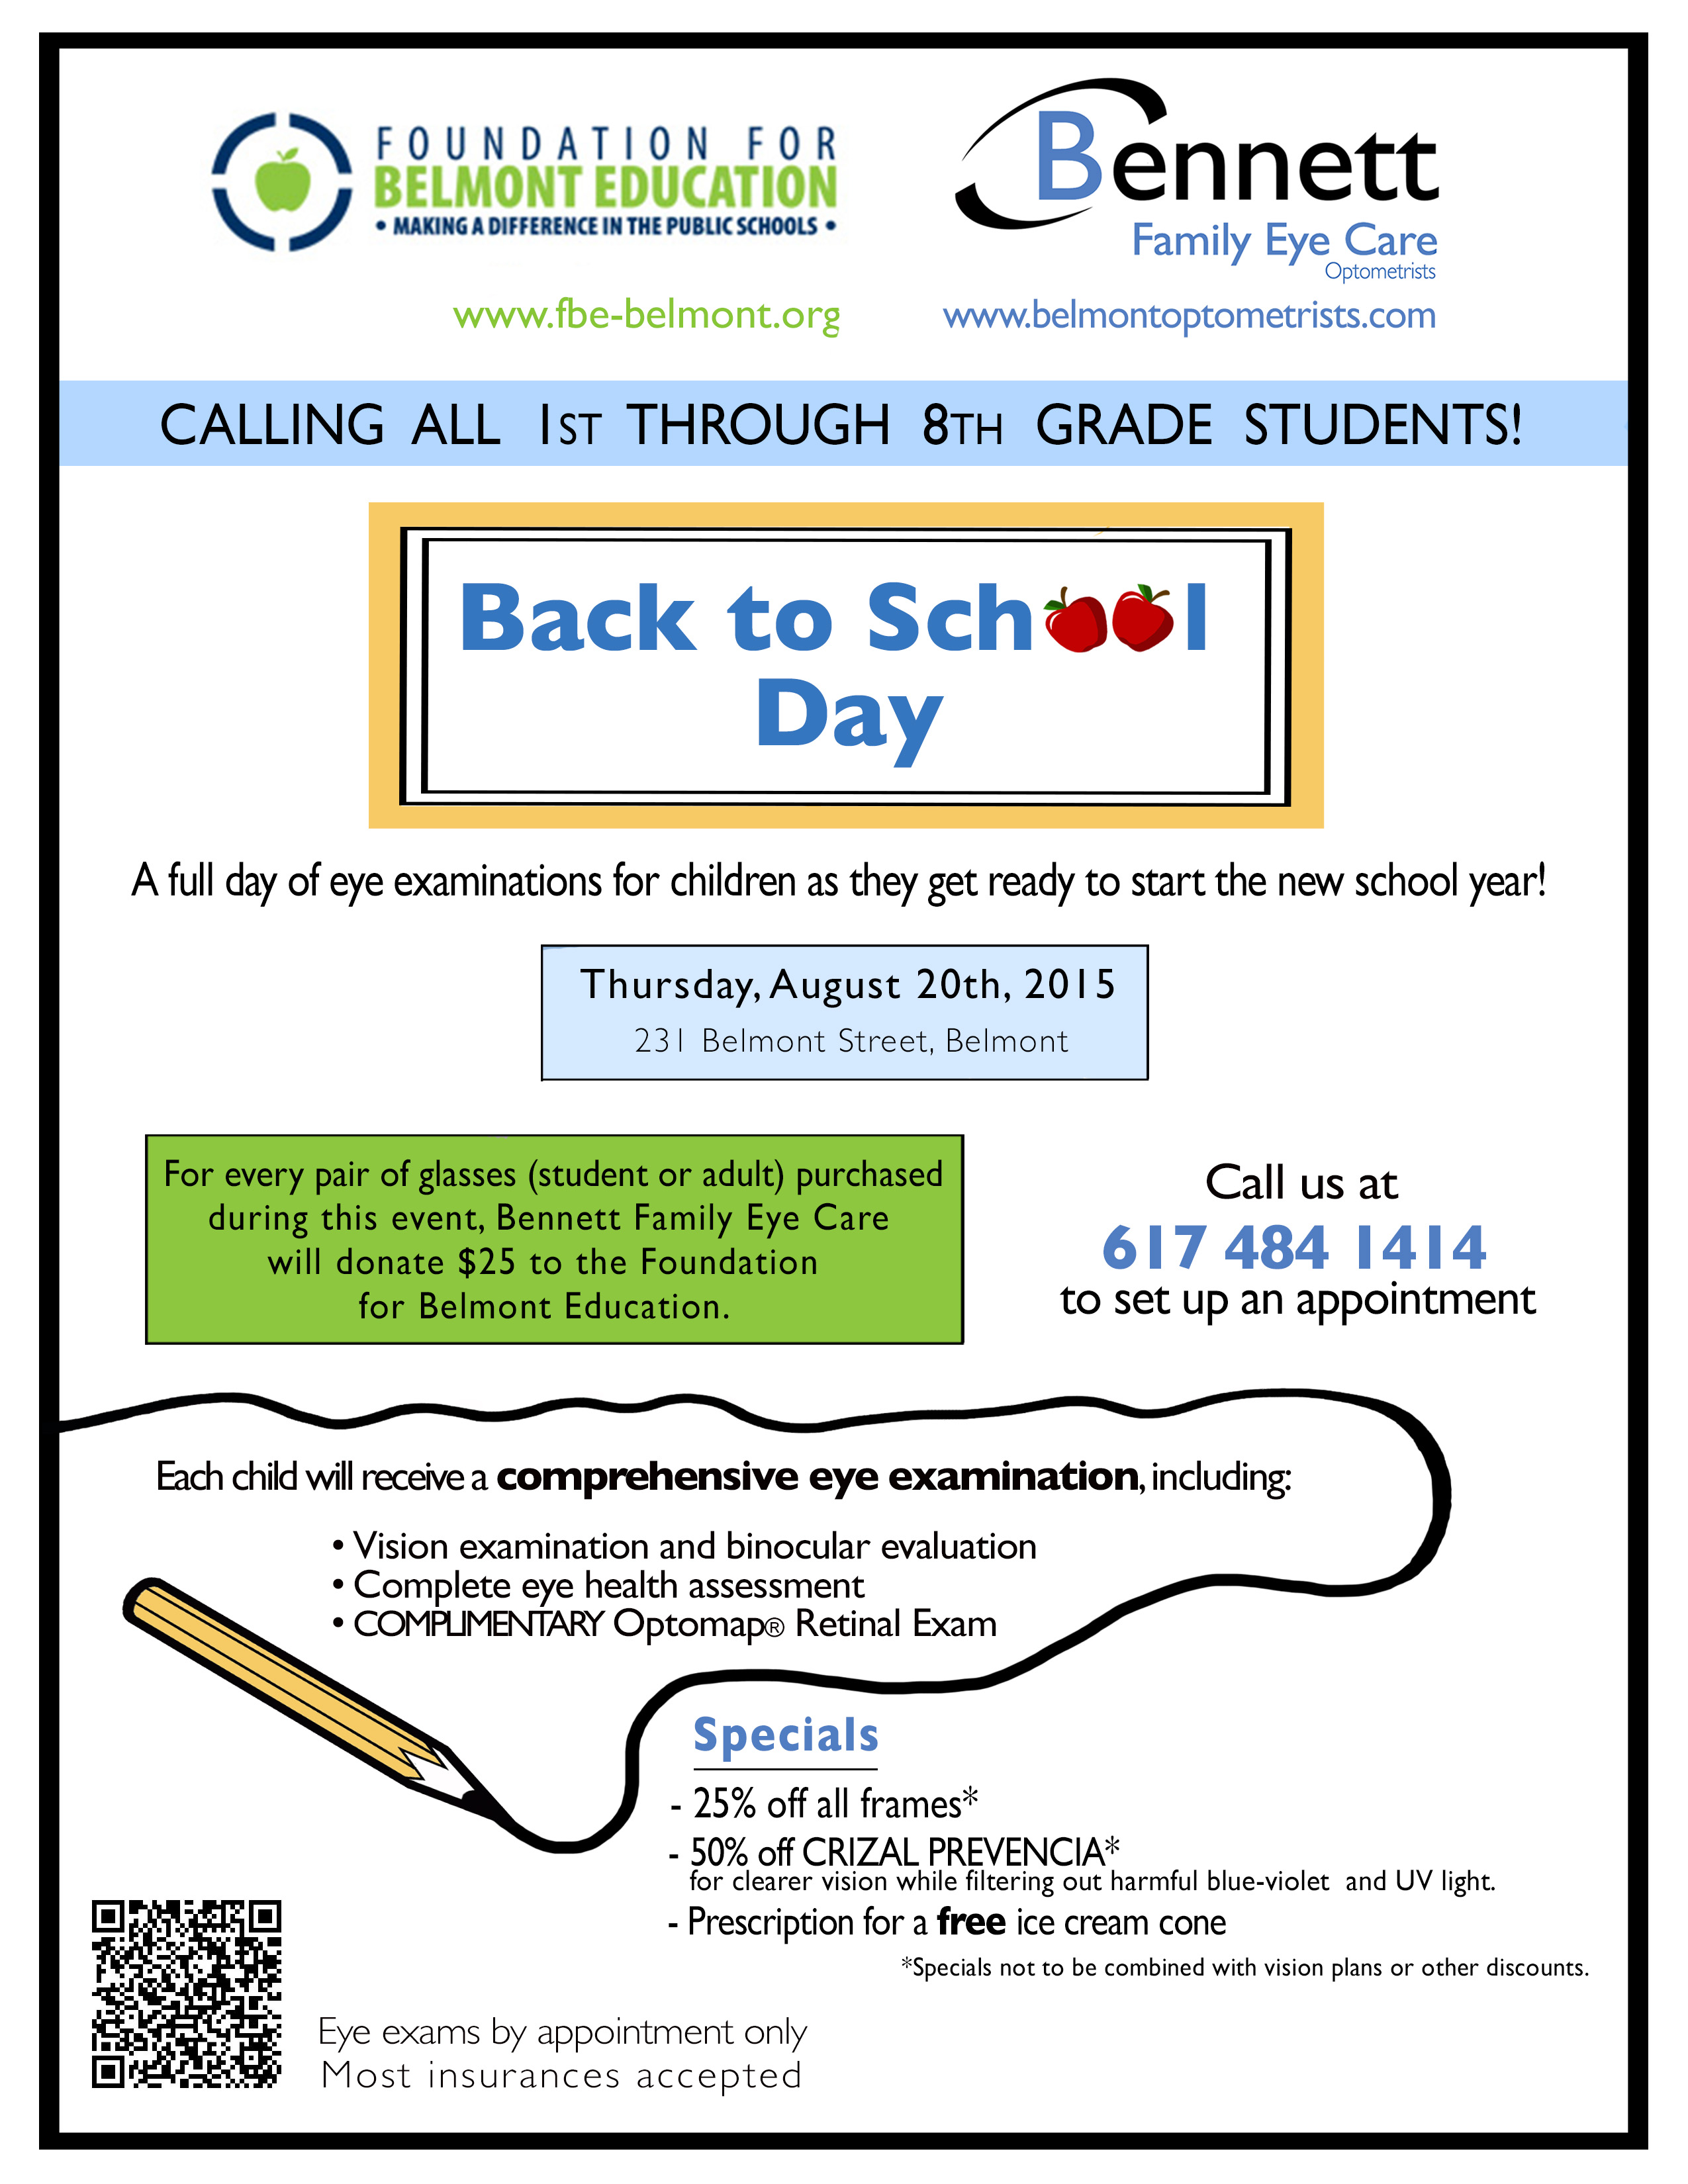 Book your student’s Back to School Day appointment at Bennett Family Eye Care and support the FBE